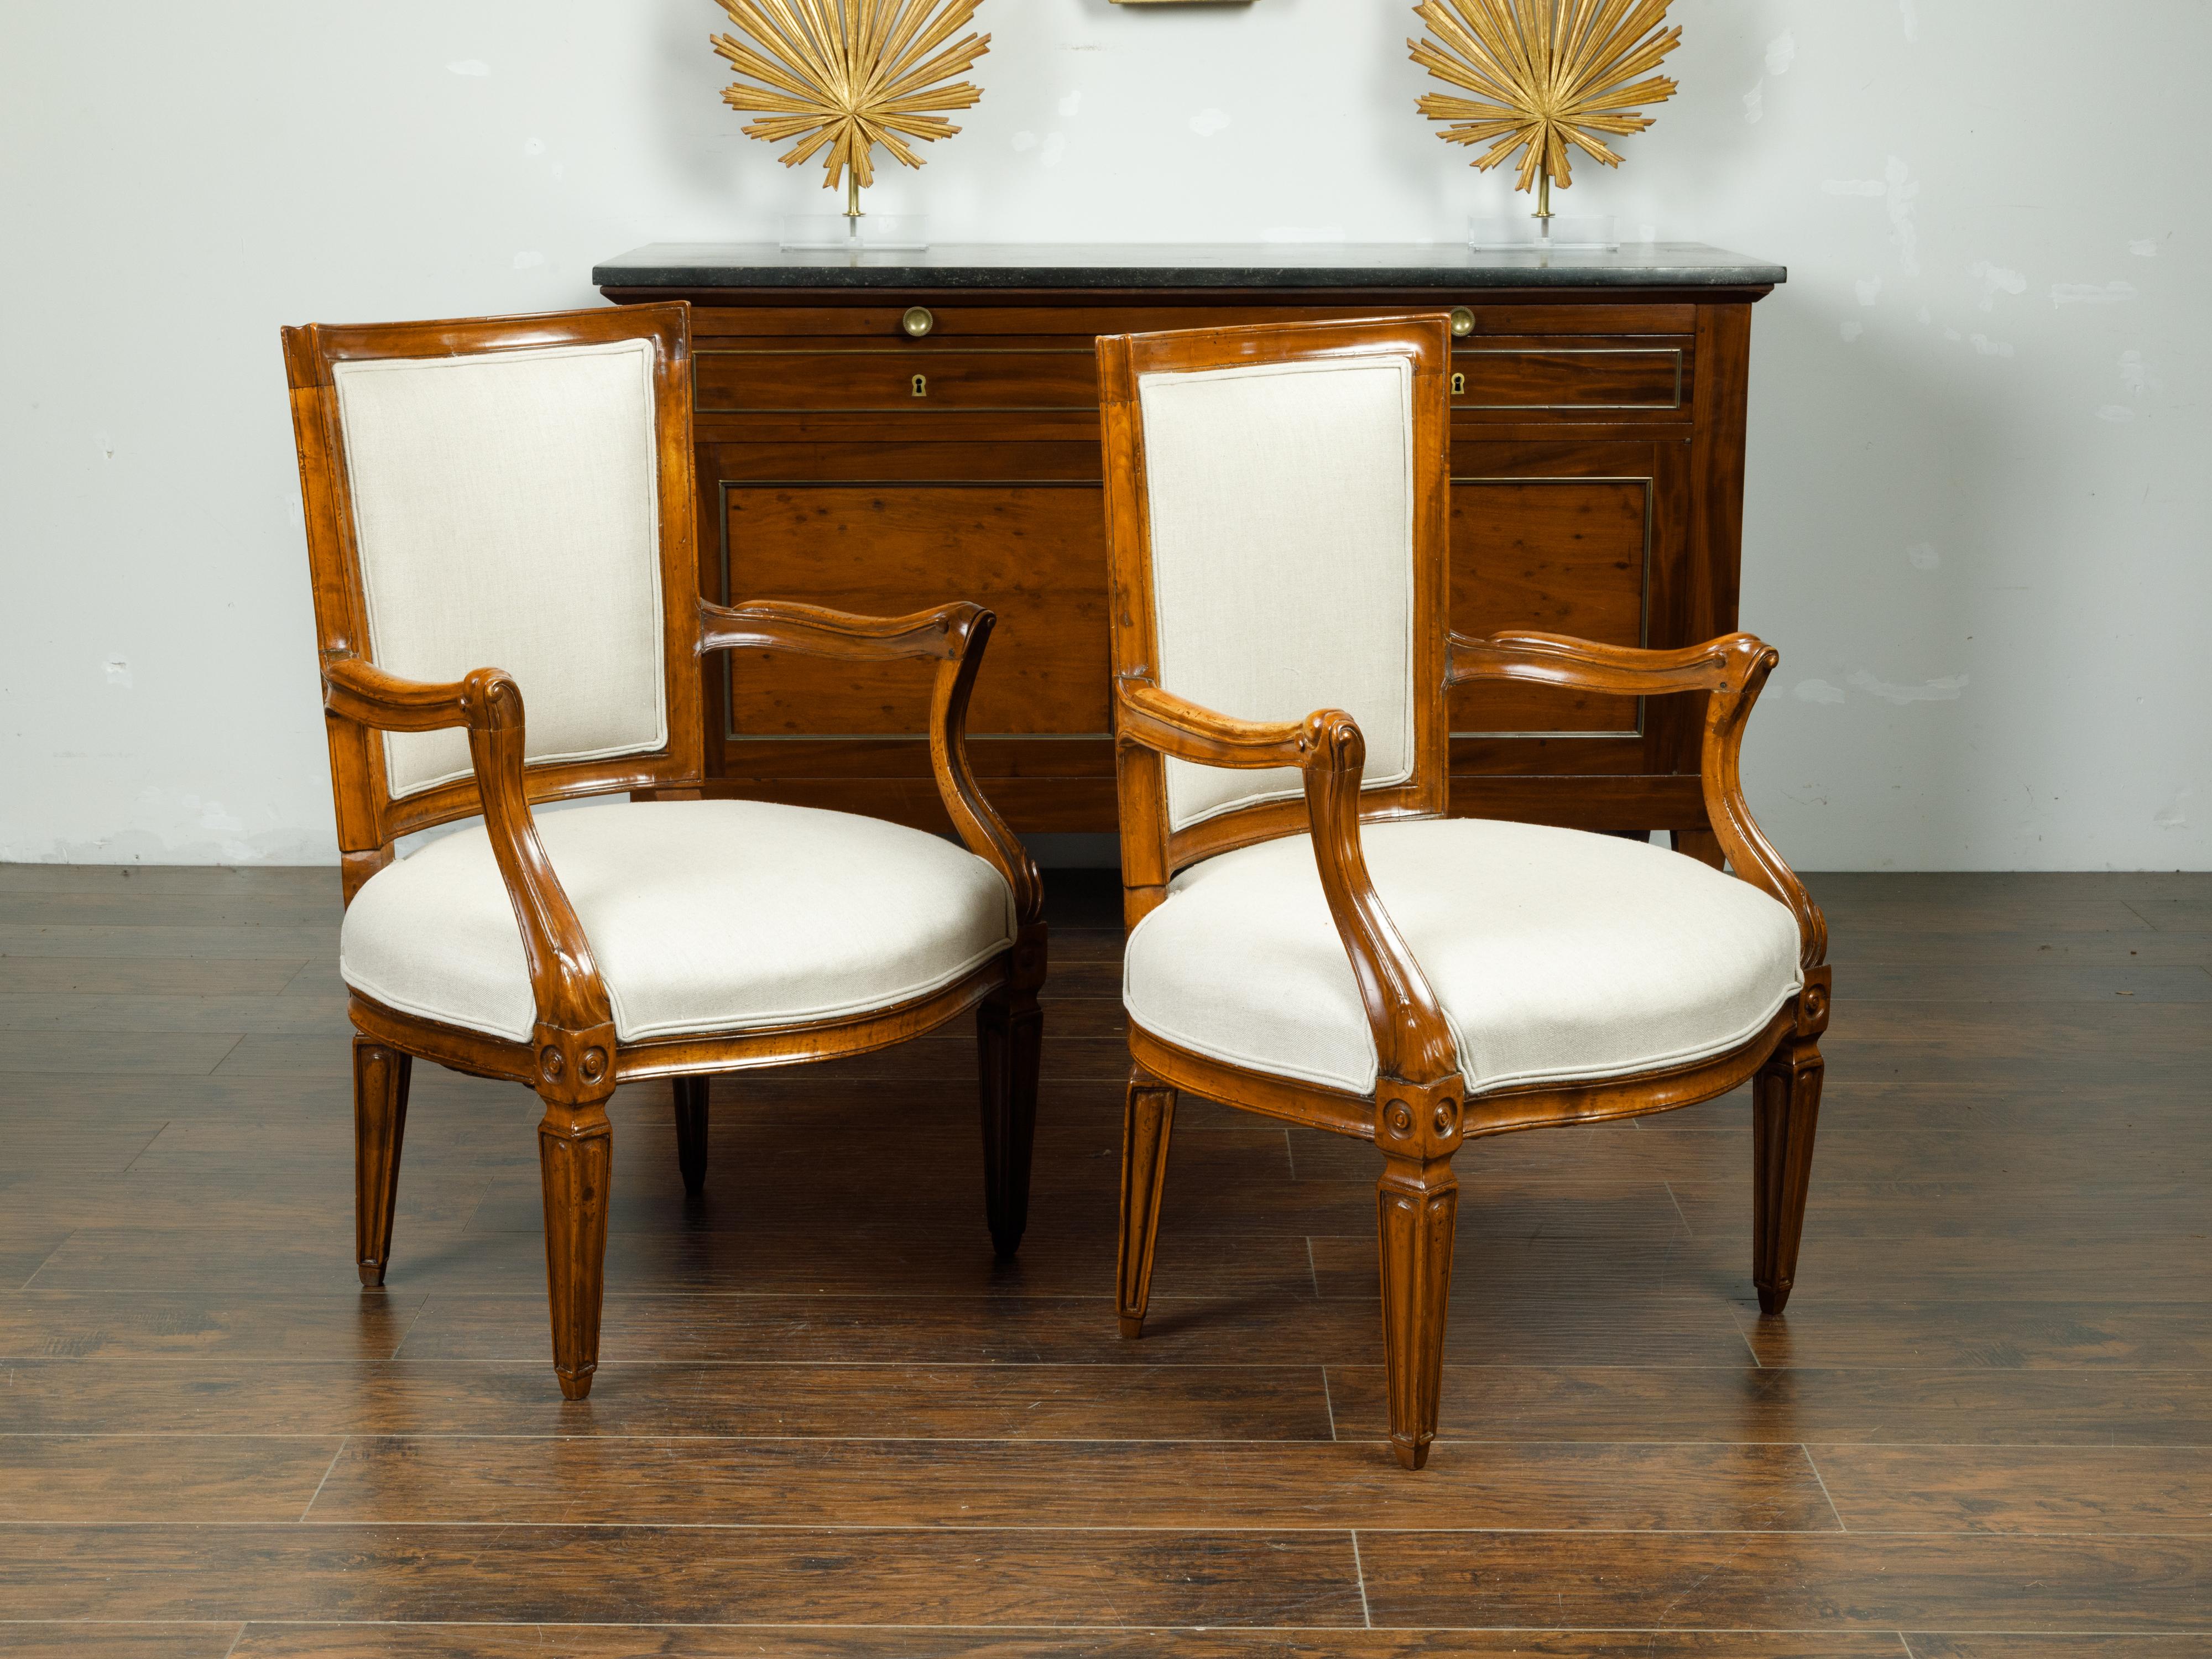 Pair of Italian 1860s Walnut Armchairs with Tapered Legs and New Upholstery In Good Condition For Sale In Atlanta, GA